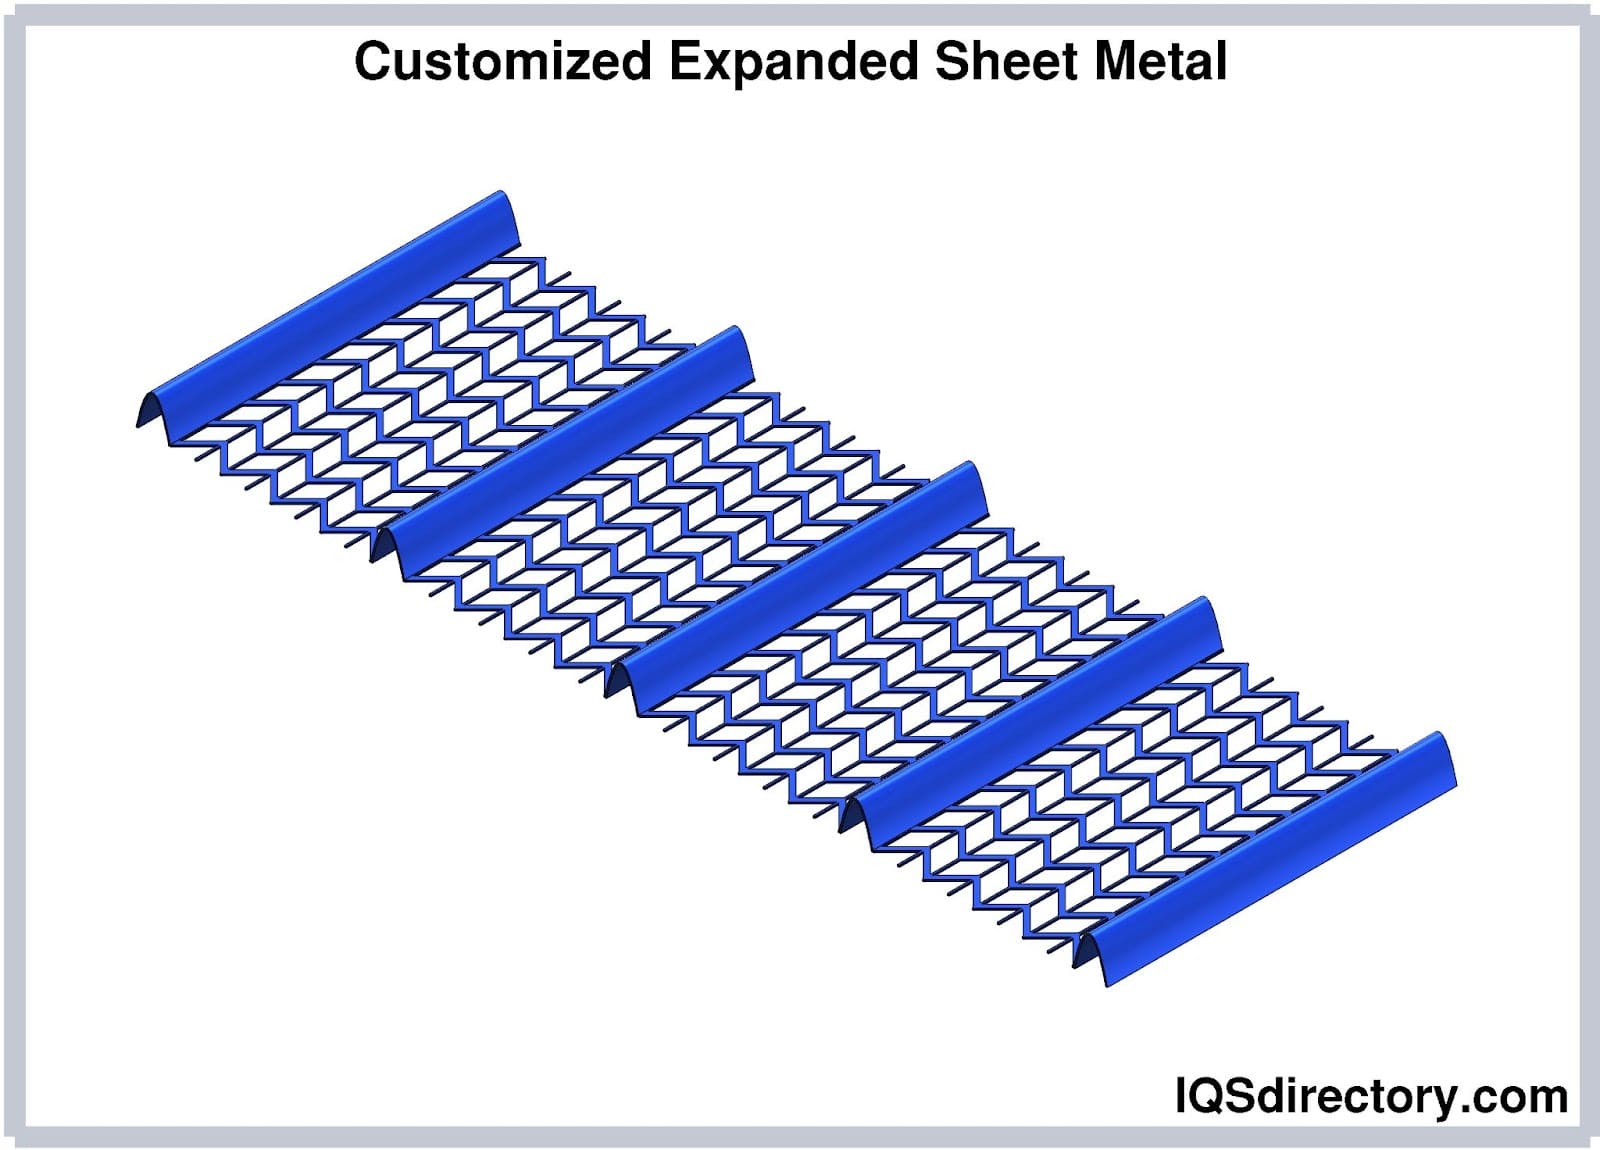 Customized Expanded Sheet Metal